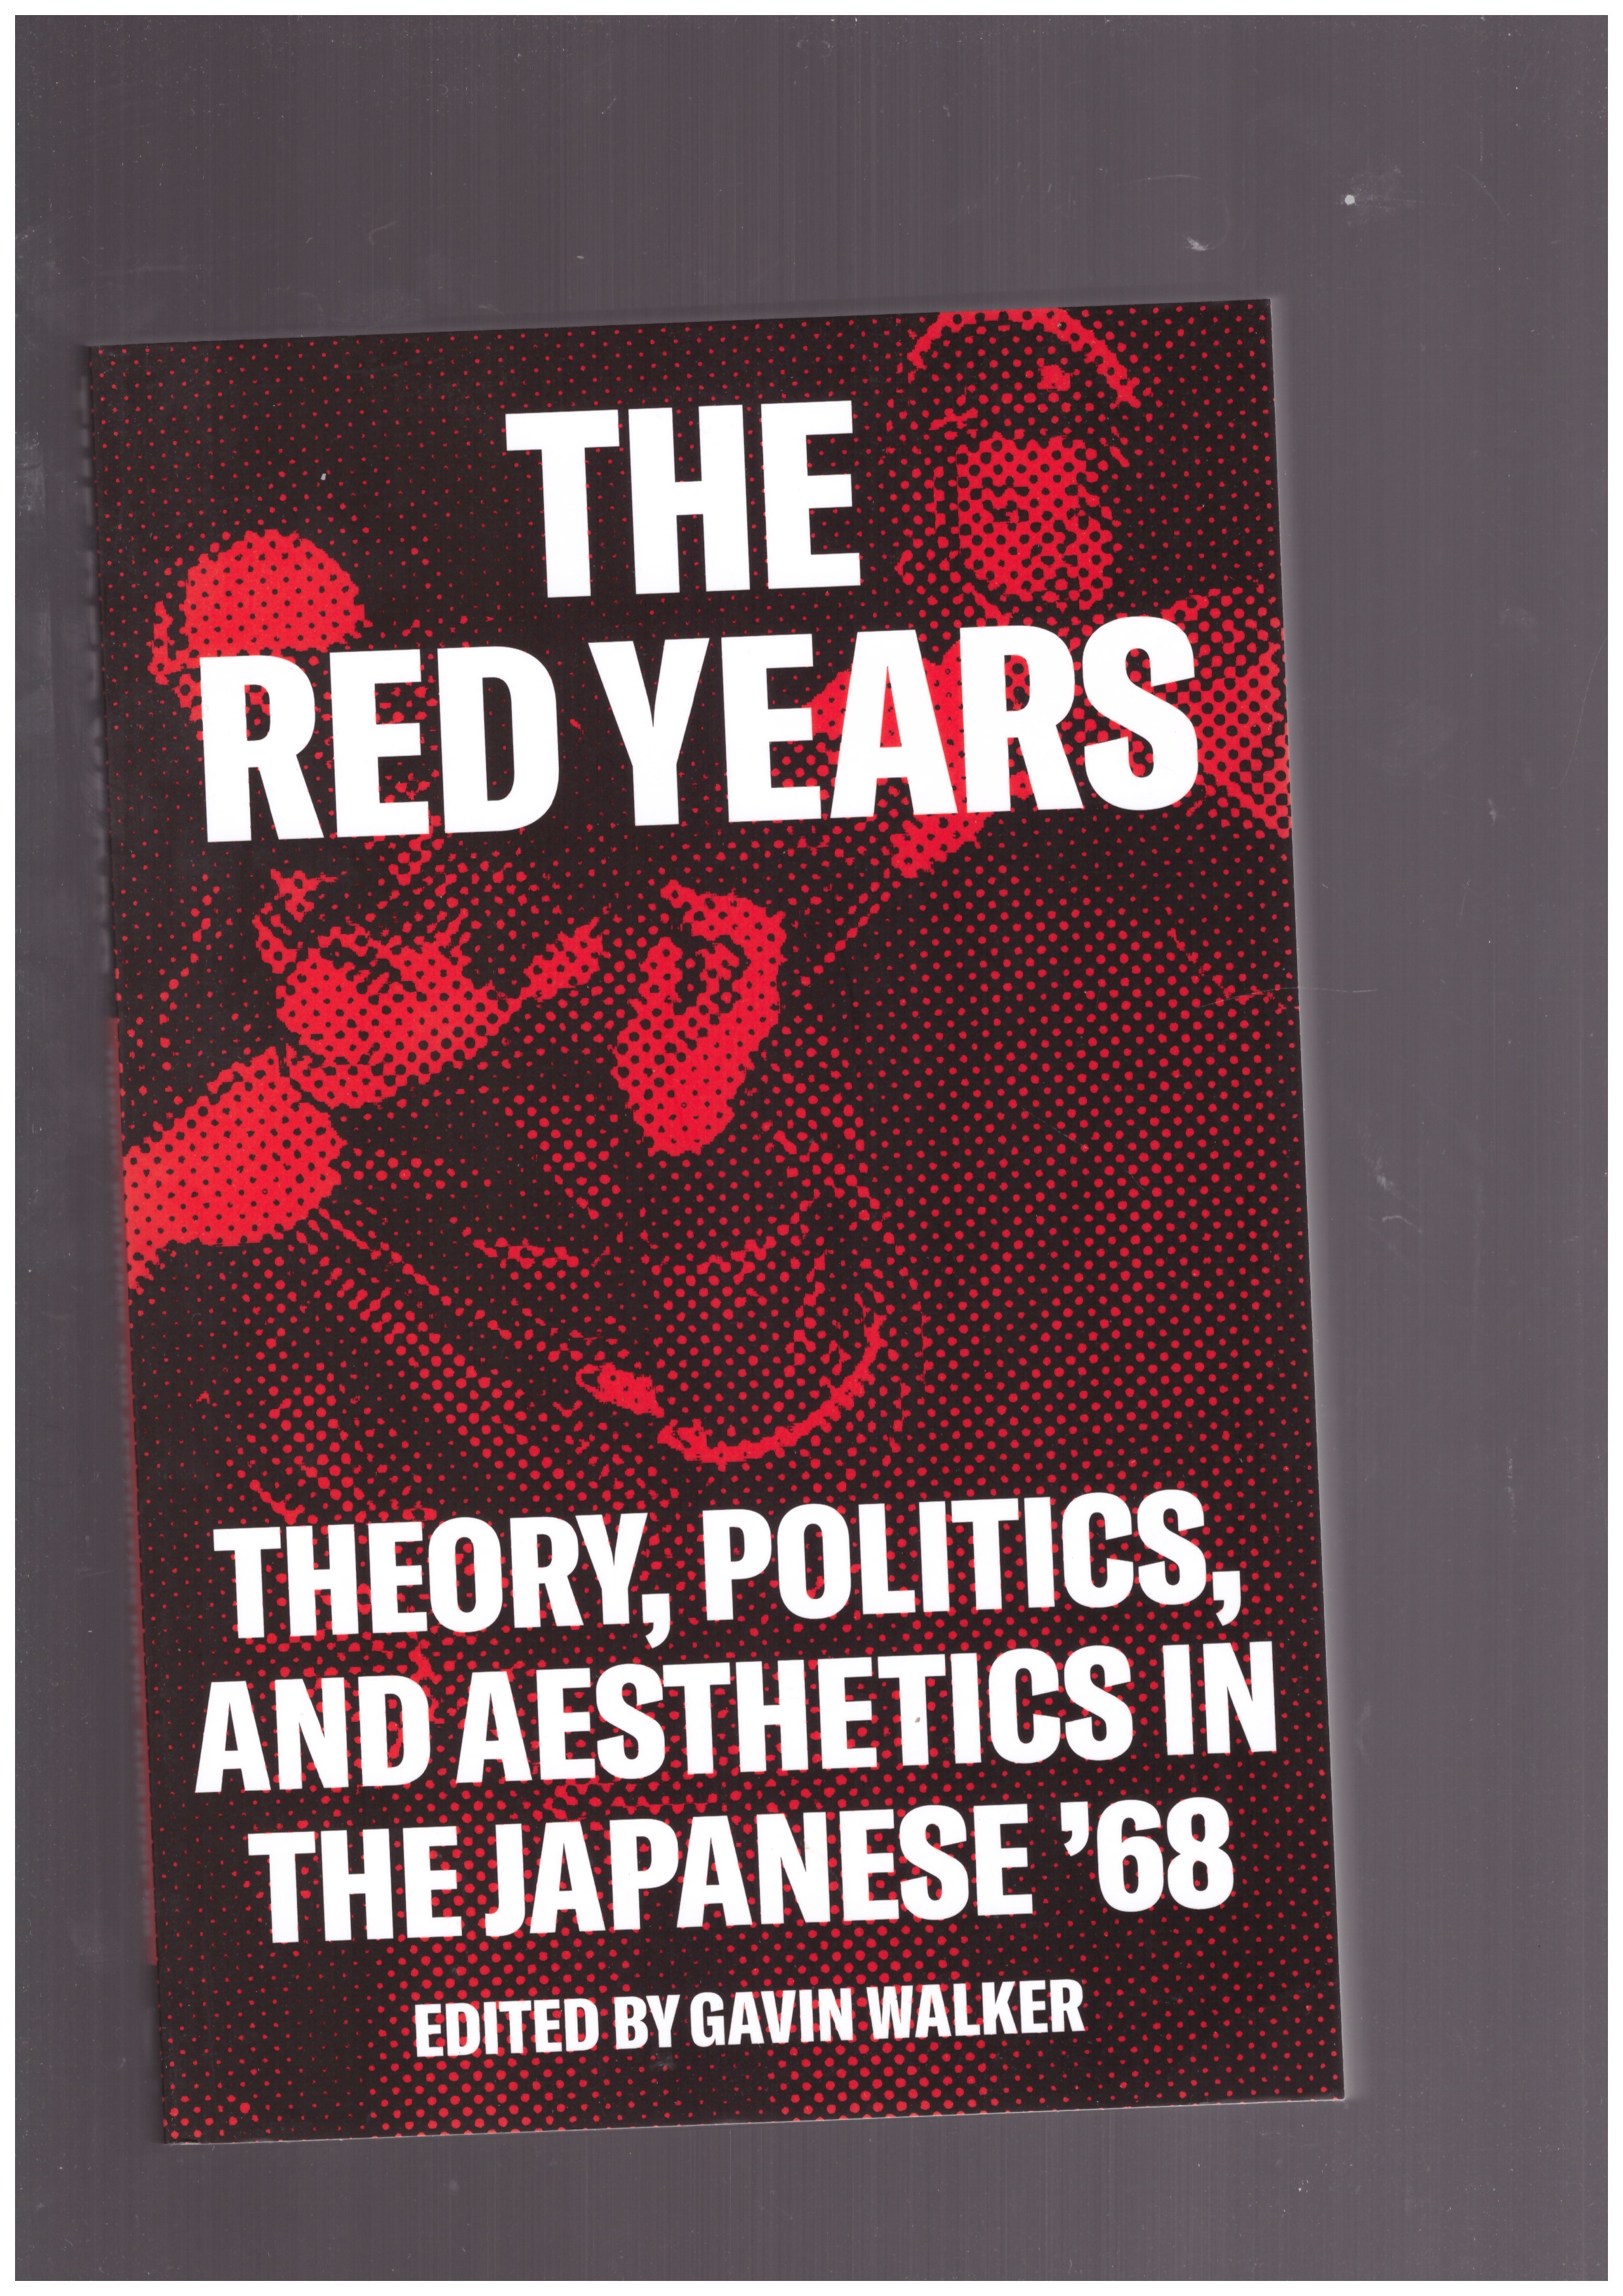 WALKER, Gavin (ed.) - The Red Years. Theory, Politics, and Aesthetics in the Japanese ’68